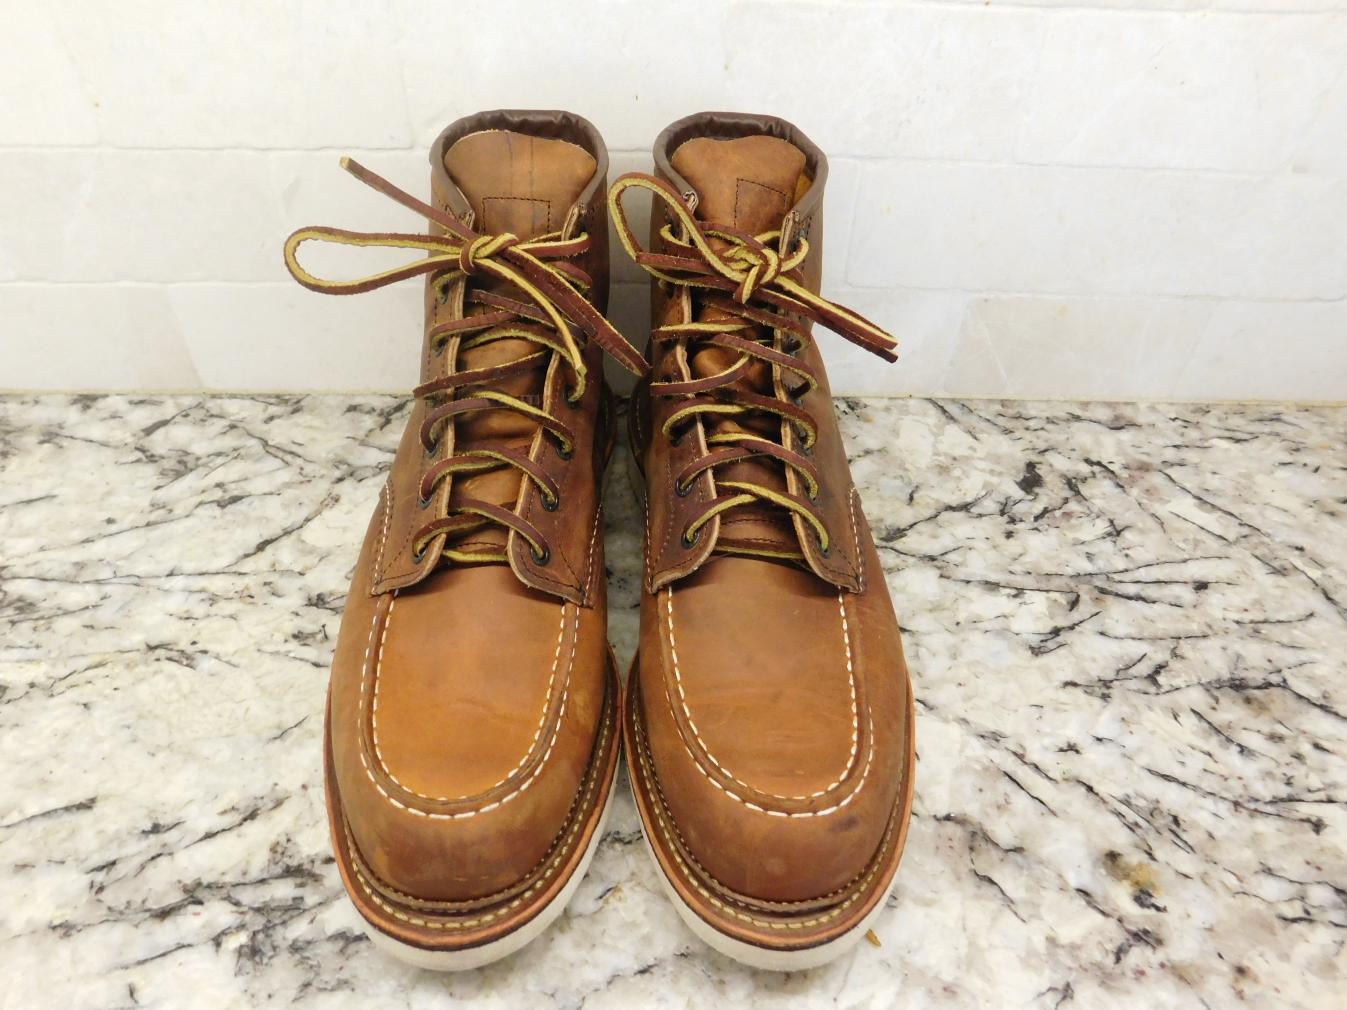 red wing 1907 boots